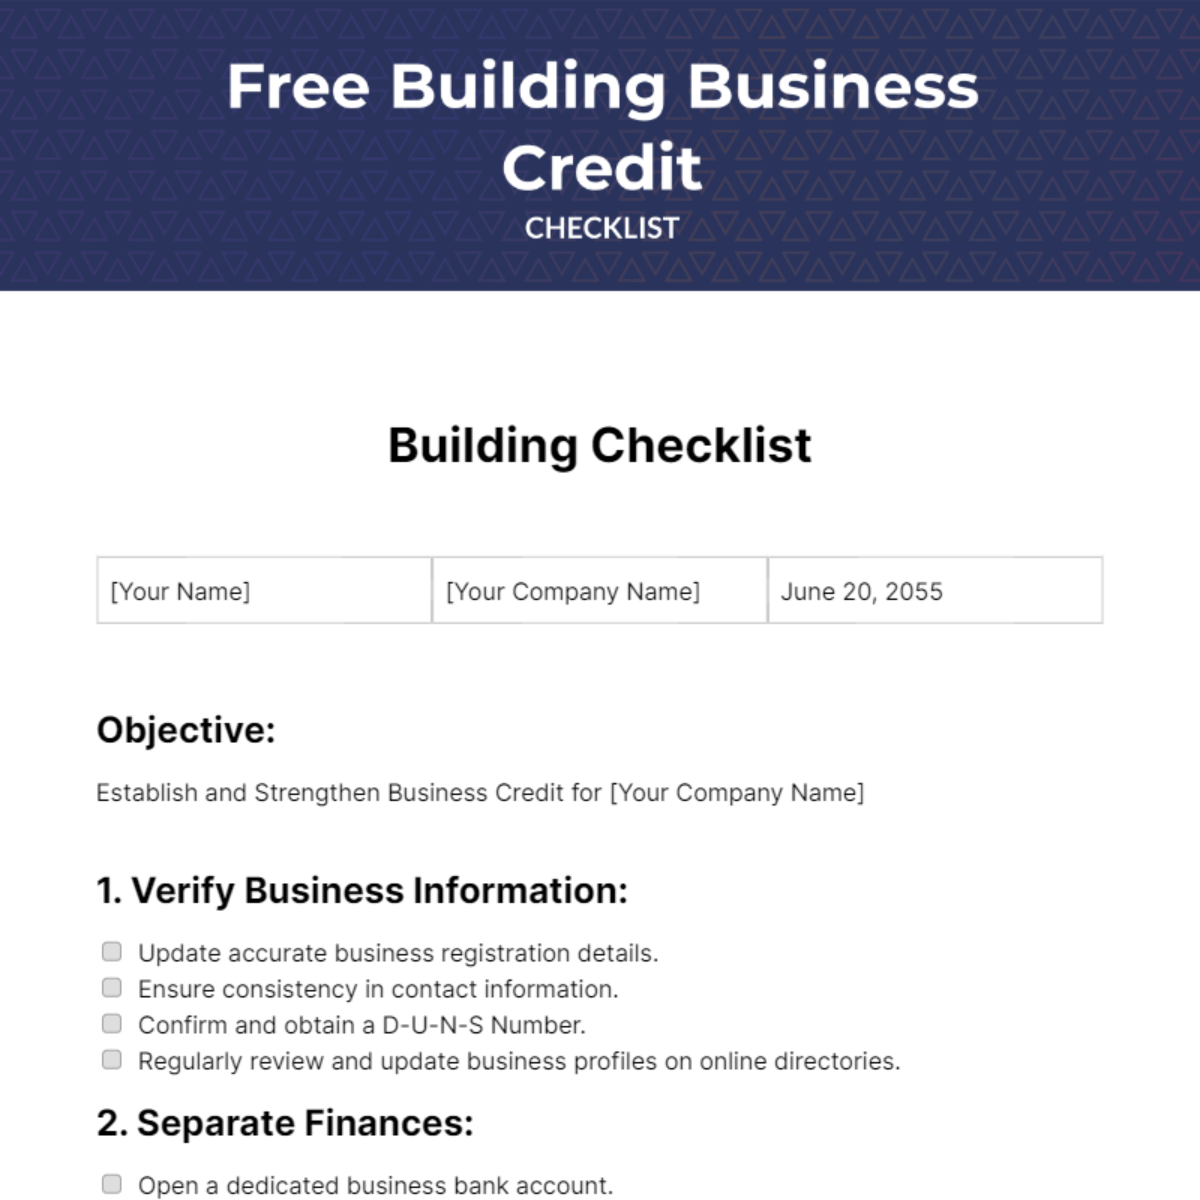 Free Building Business Credit Checklist Template